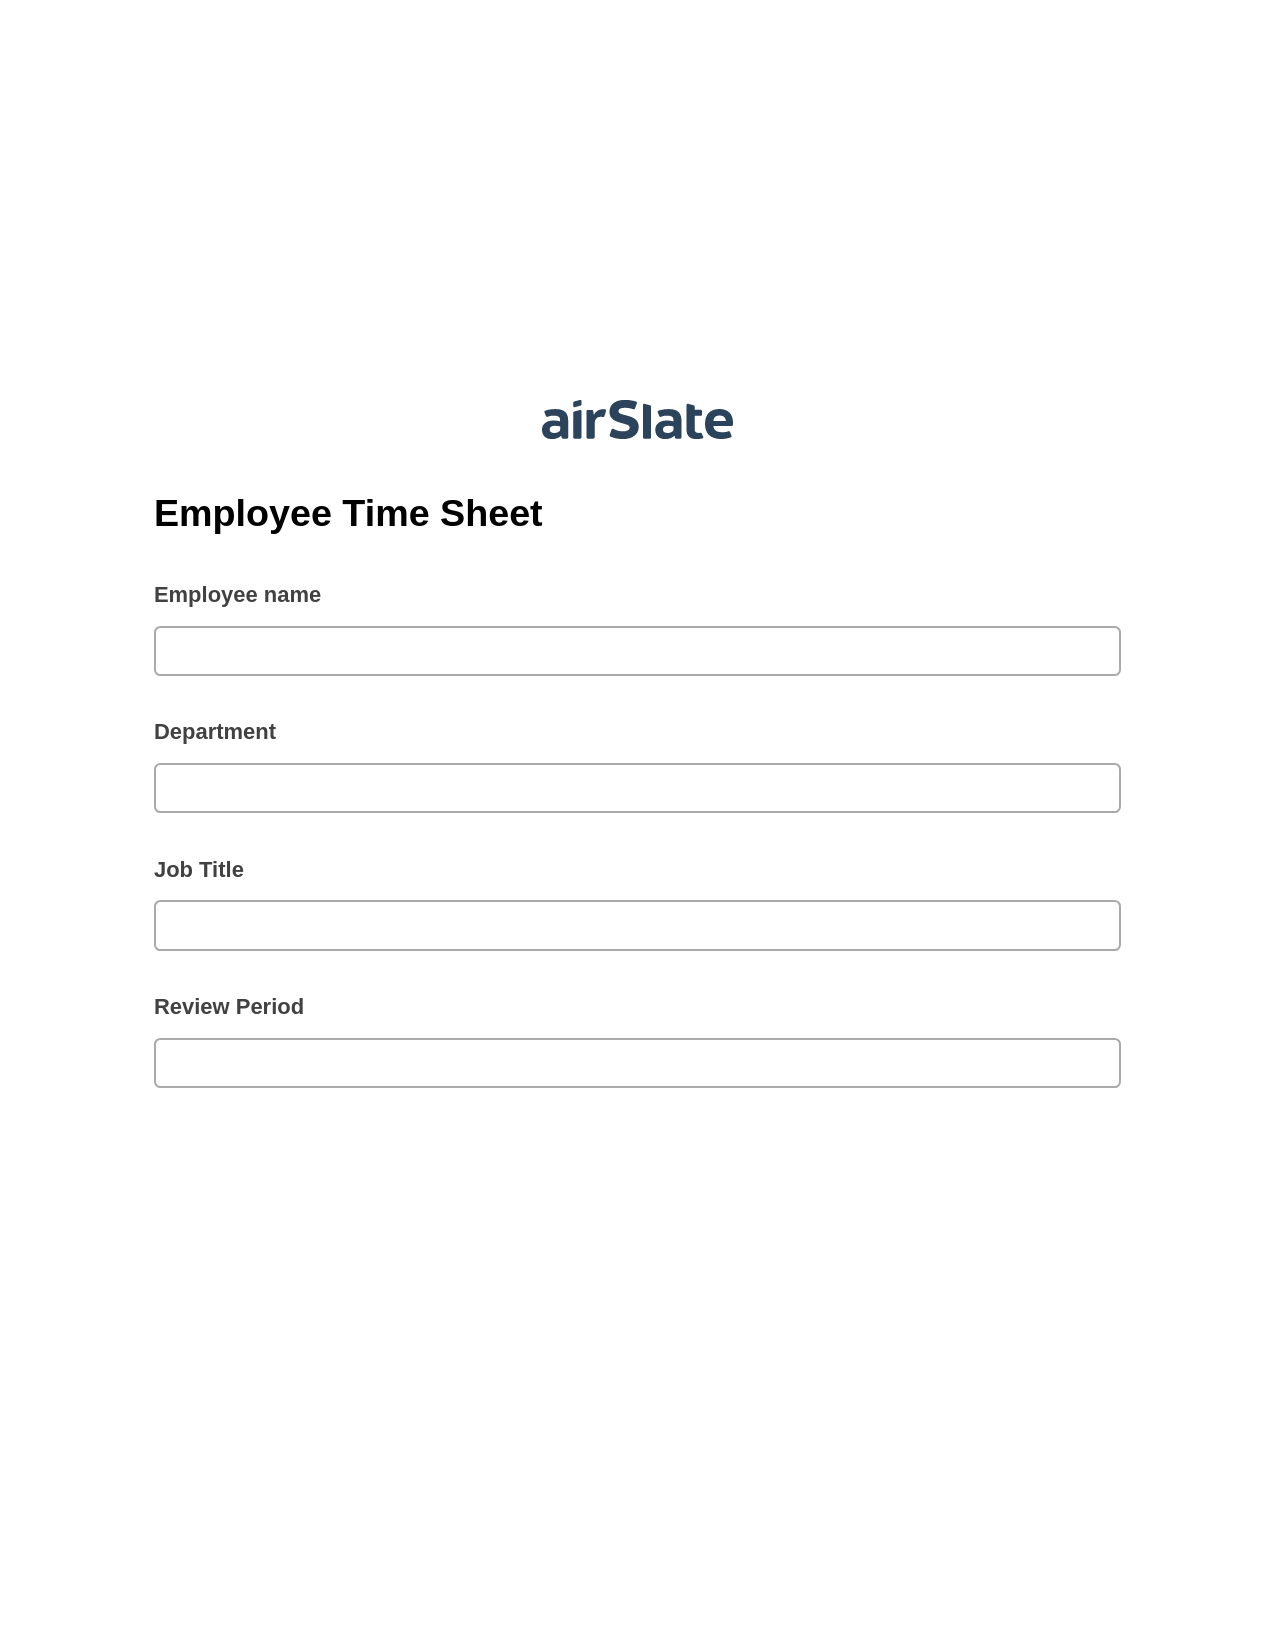 Multirole Employee Time Sheet Pre-fill from Google Sheets Bot, Update Audit Trail Bot, Export to Excel 365 Bot